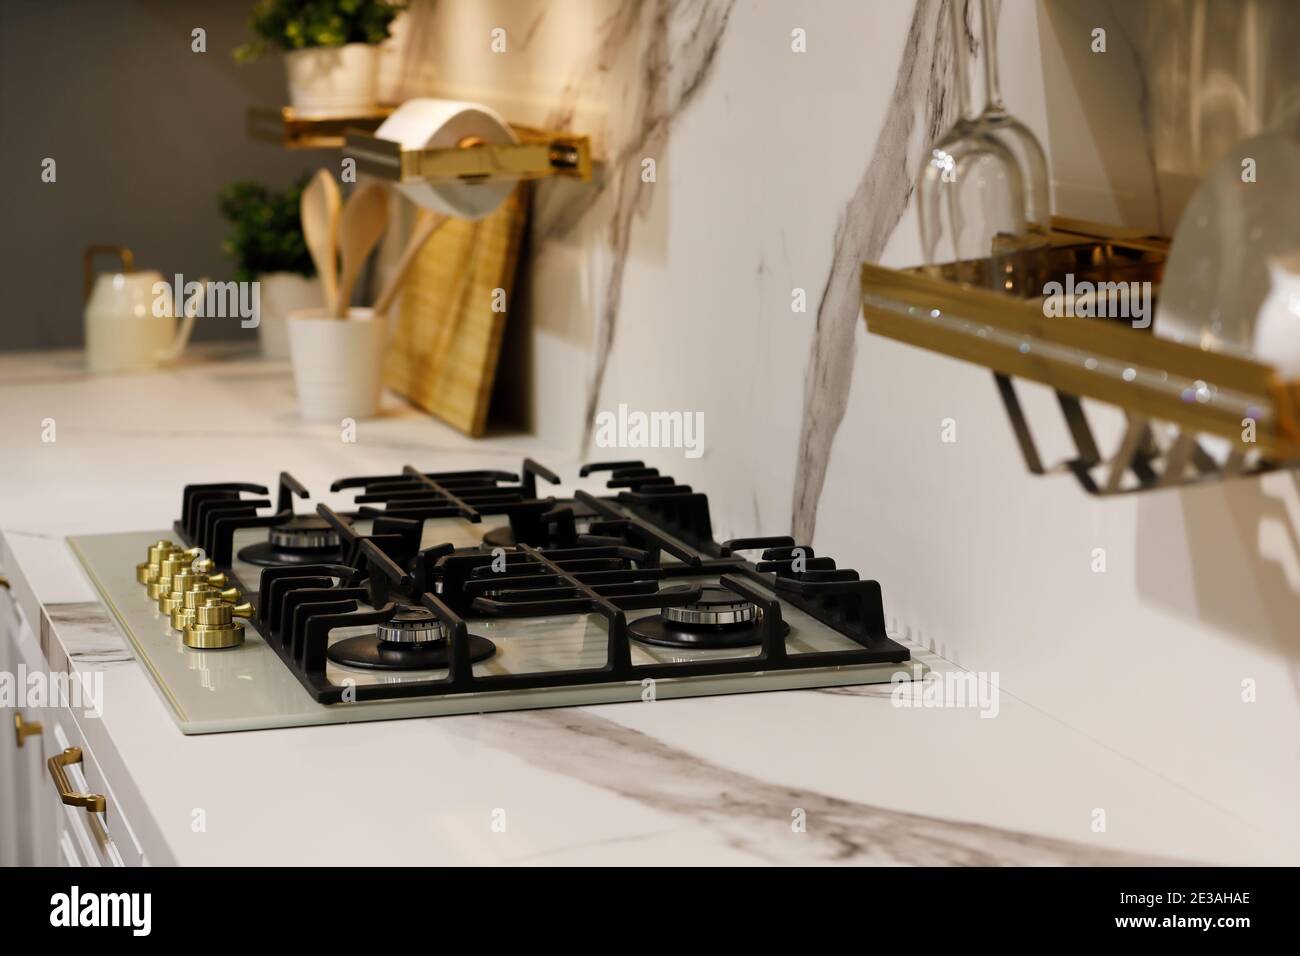 Marble kitchen countertop with a gas cooking range. Selective focus. Stock Photo